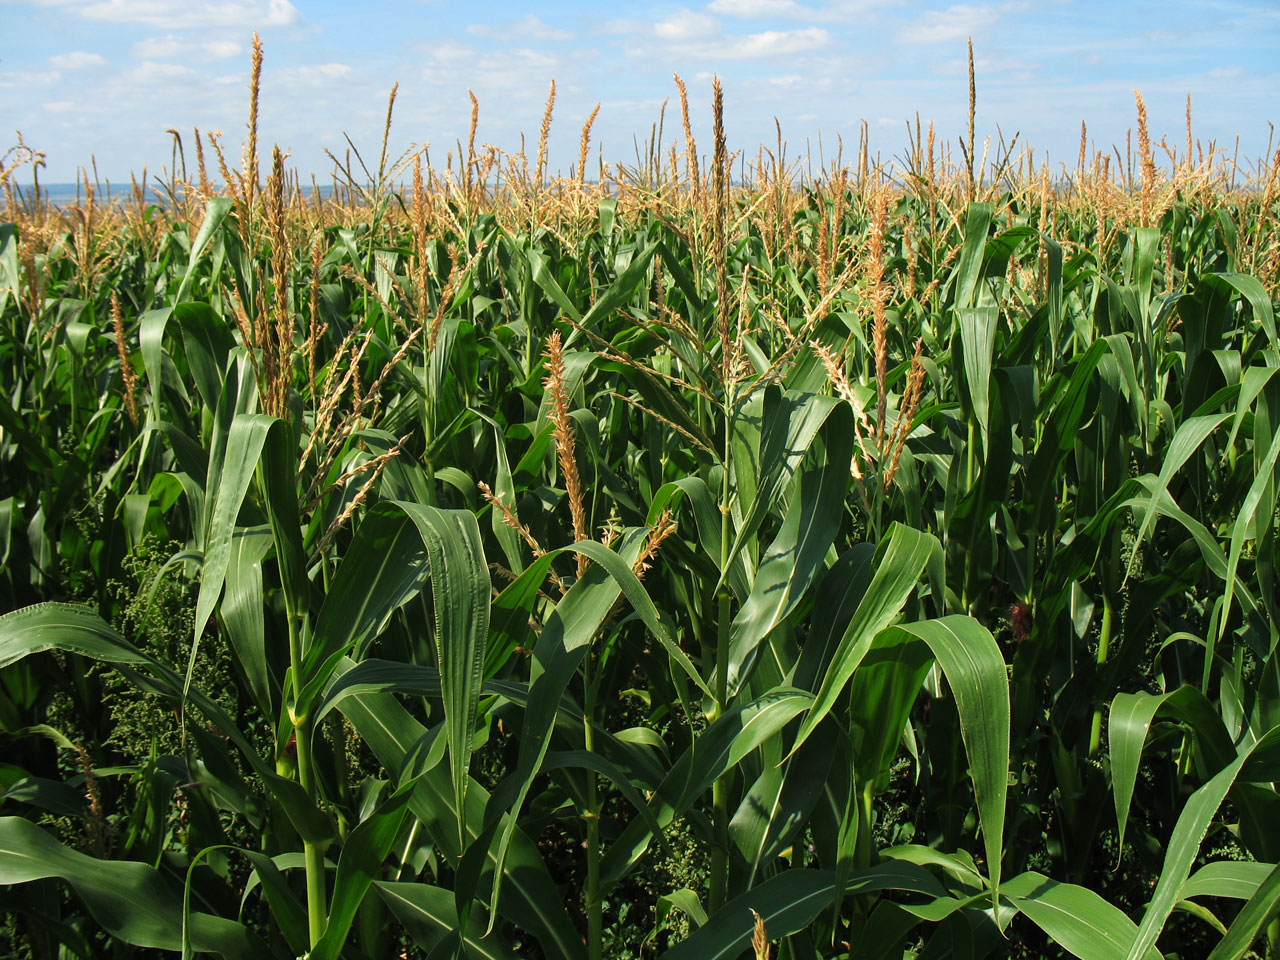 Bullish June 30th Acreage Report from USDA Pushes Corn, Wheat and Soybeans Prices Sharply Higher